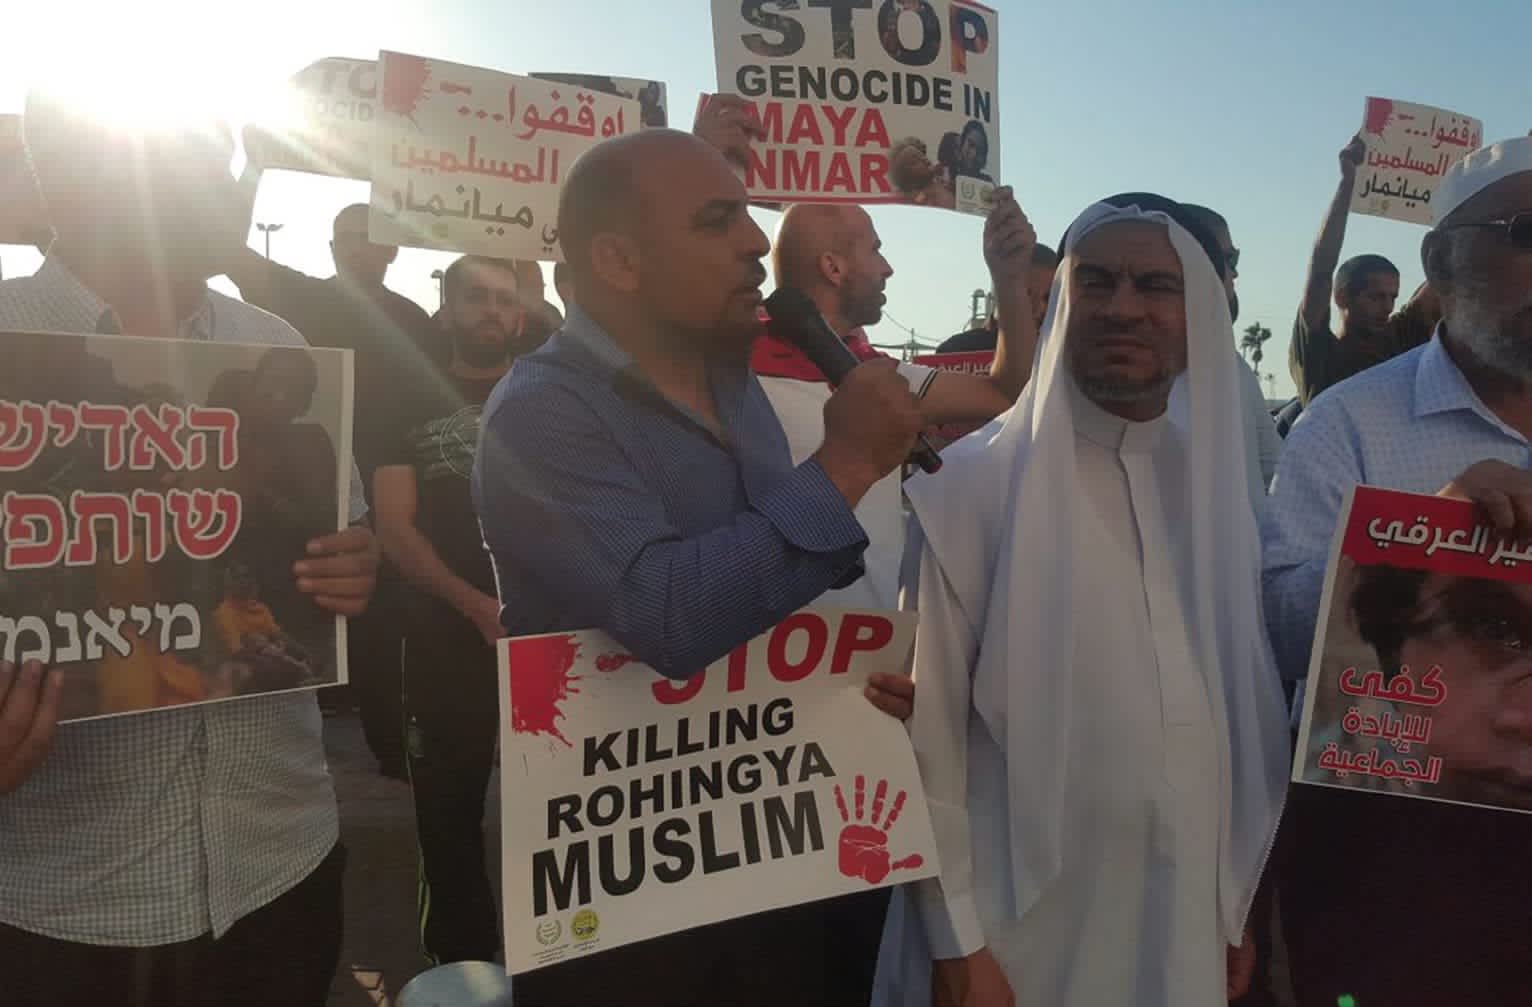 MK MASOUD GNAIM (center) participates in a protest against the killing of his Rohingya Muslim ‘brothers’ in Myanmar, outside the country’s embassy in Tel Aviv, September 11, 2017 (Photo credit: United Arab List)